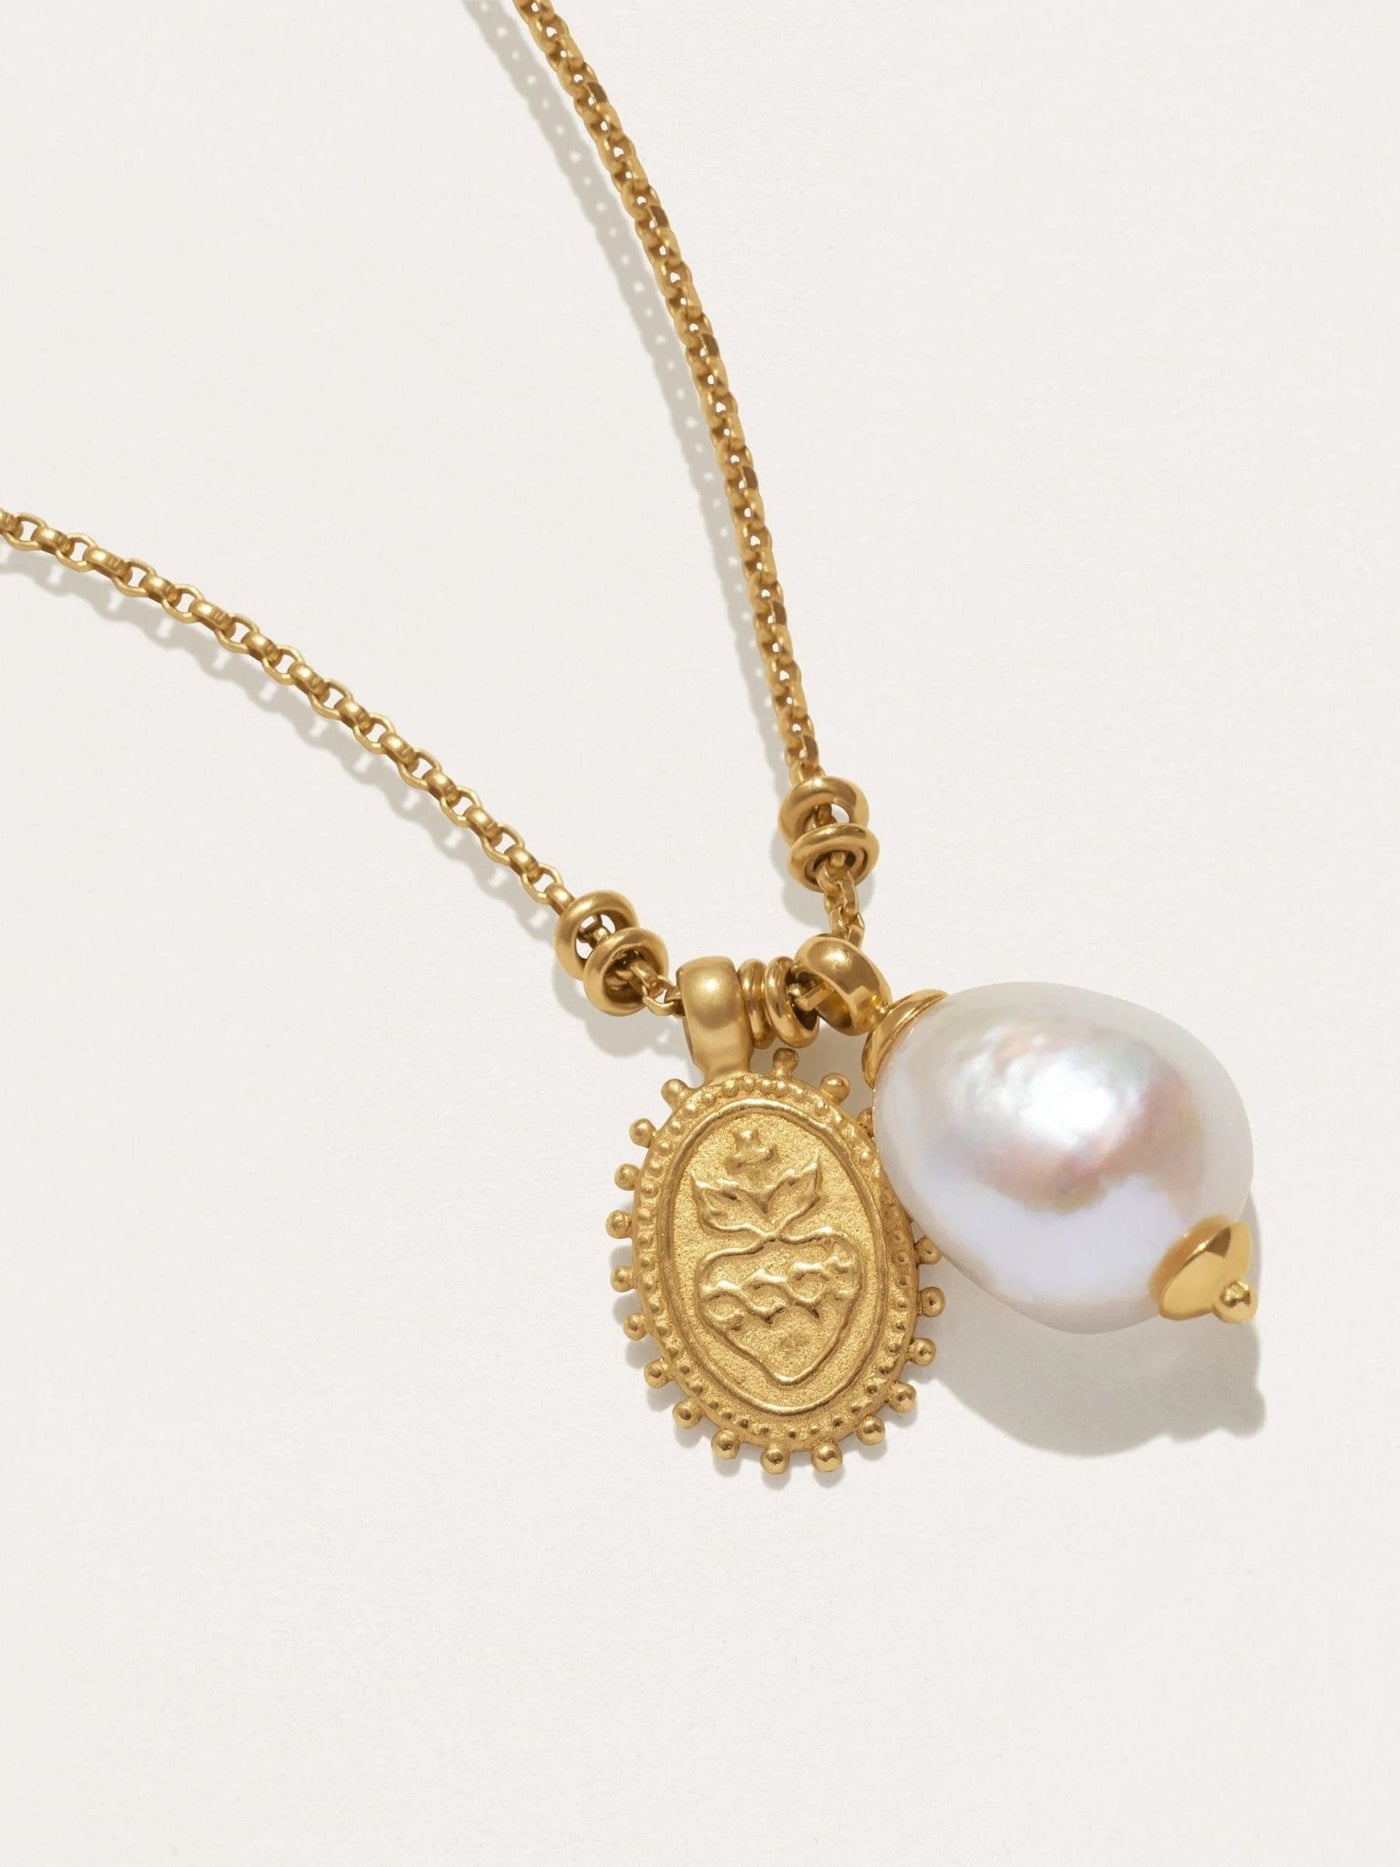 Flame Heart Baroque Pearl Necklace - 24K Gold PlatedAnniversary GiftBaroque Pearl NecklaceLunai Jewelry